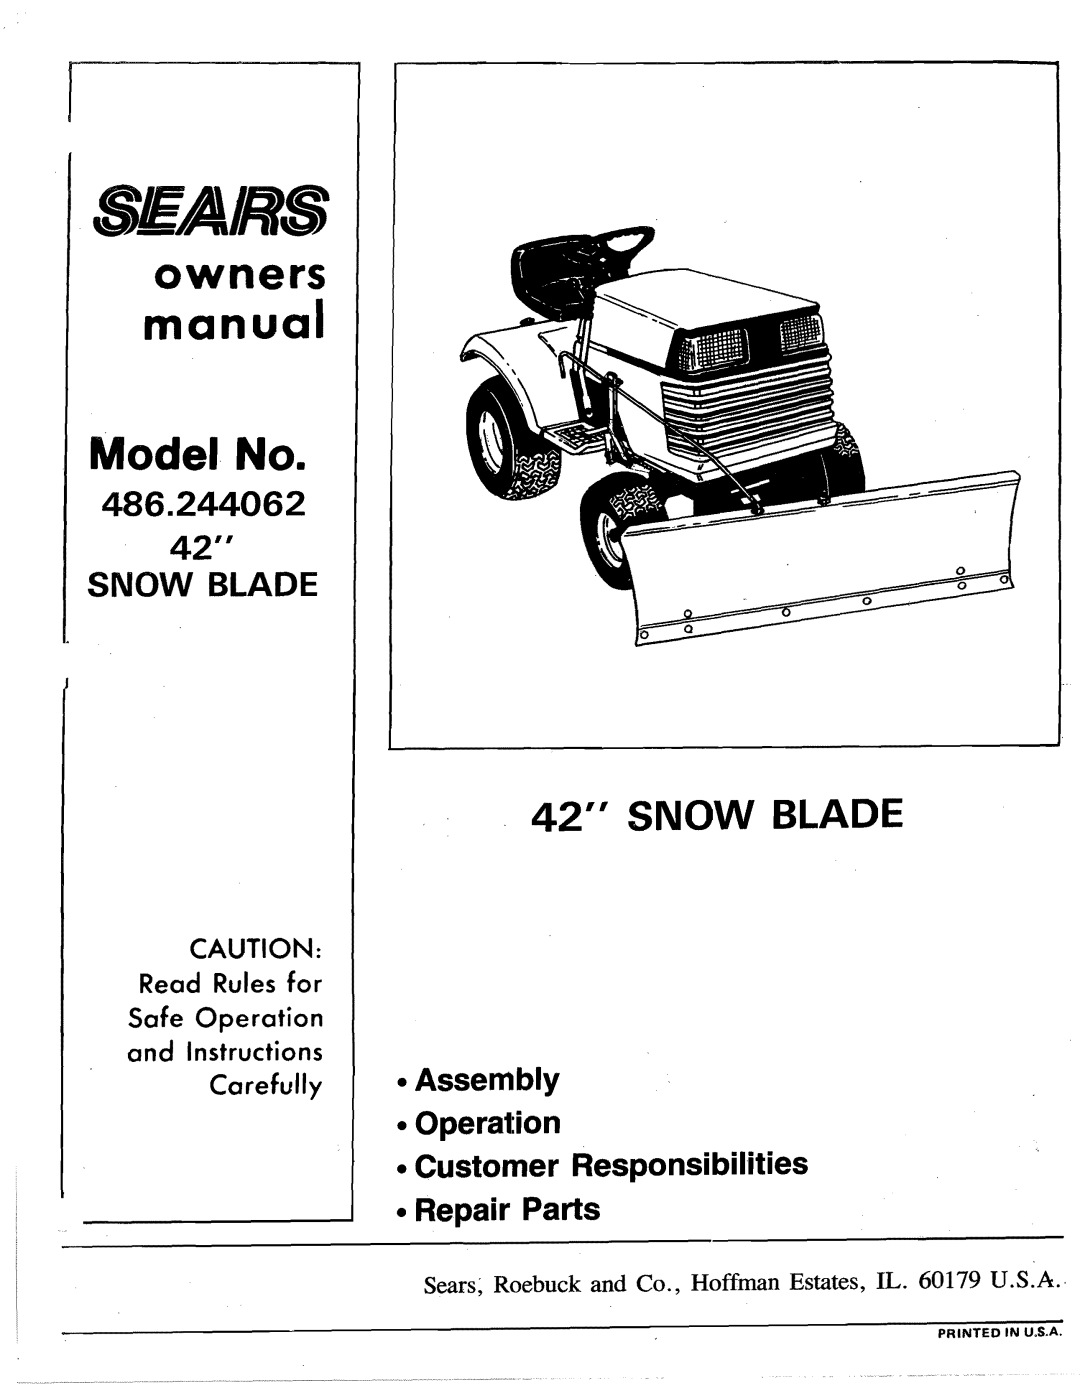 Sears owner manual Snow Blade, 486.244062 42 SNOW BLADE, •Assembly •Operation •Customer Responsibilities, •Repair Parts 